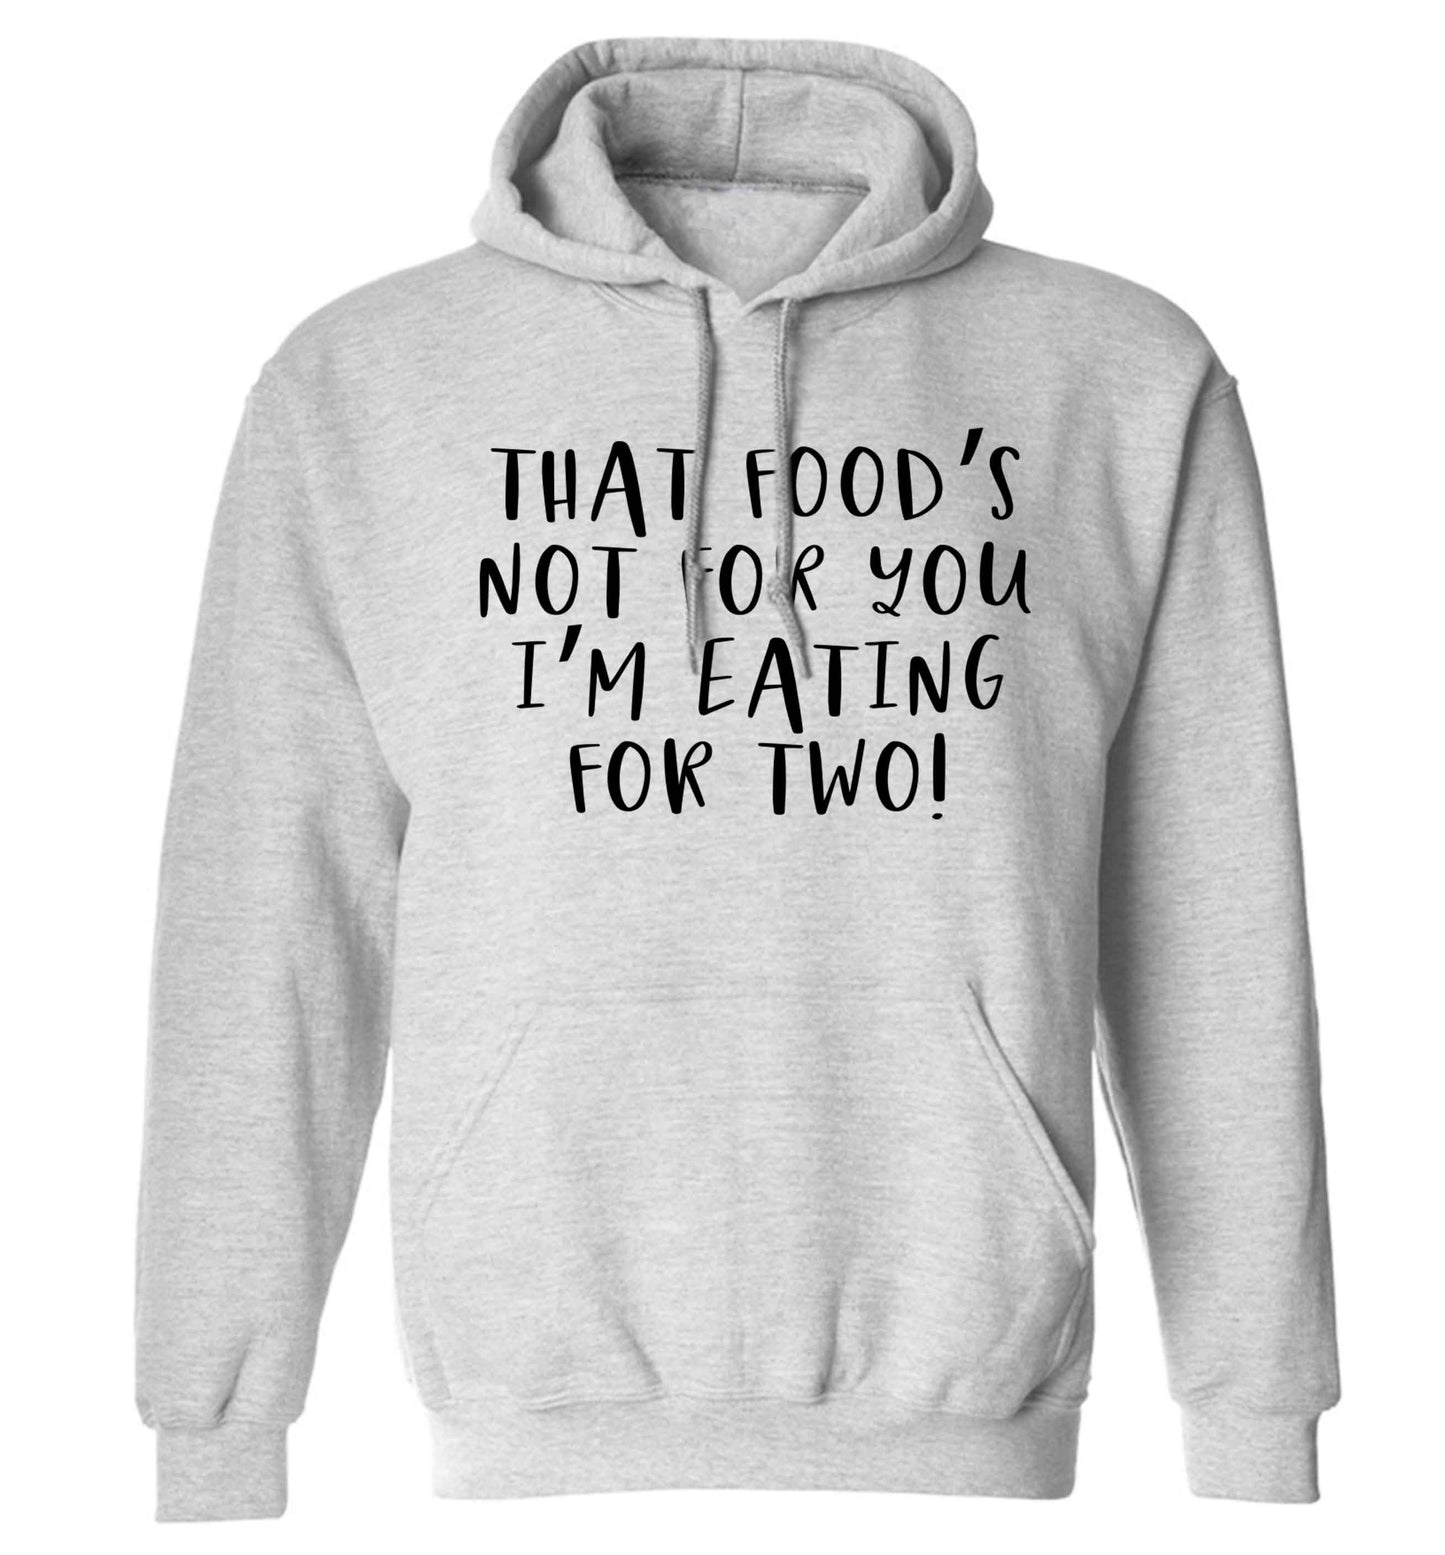 That food's not for you I'm eating for two adults unisex grey hoodie 2XL